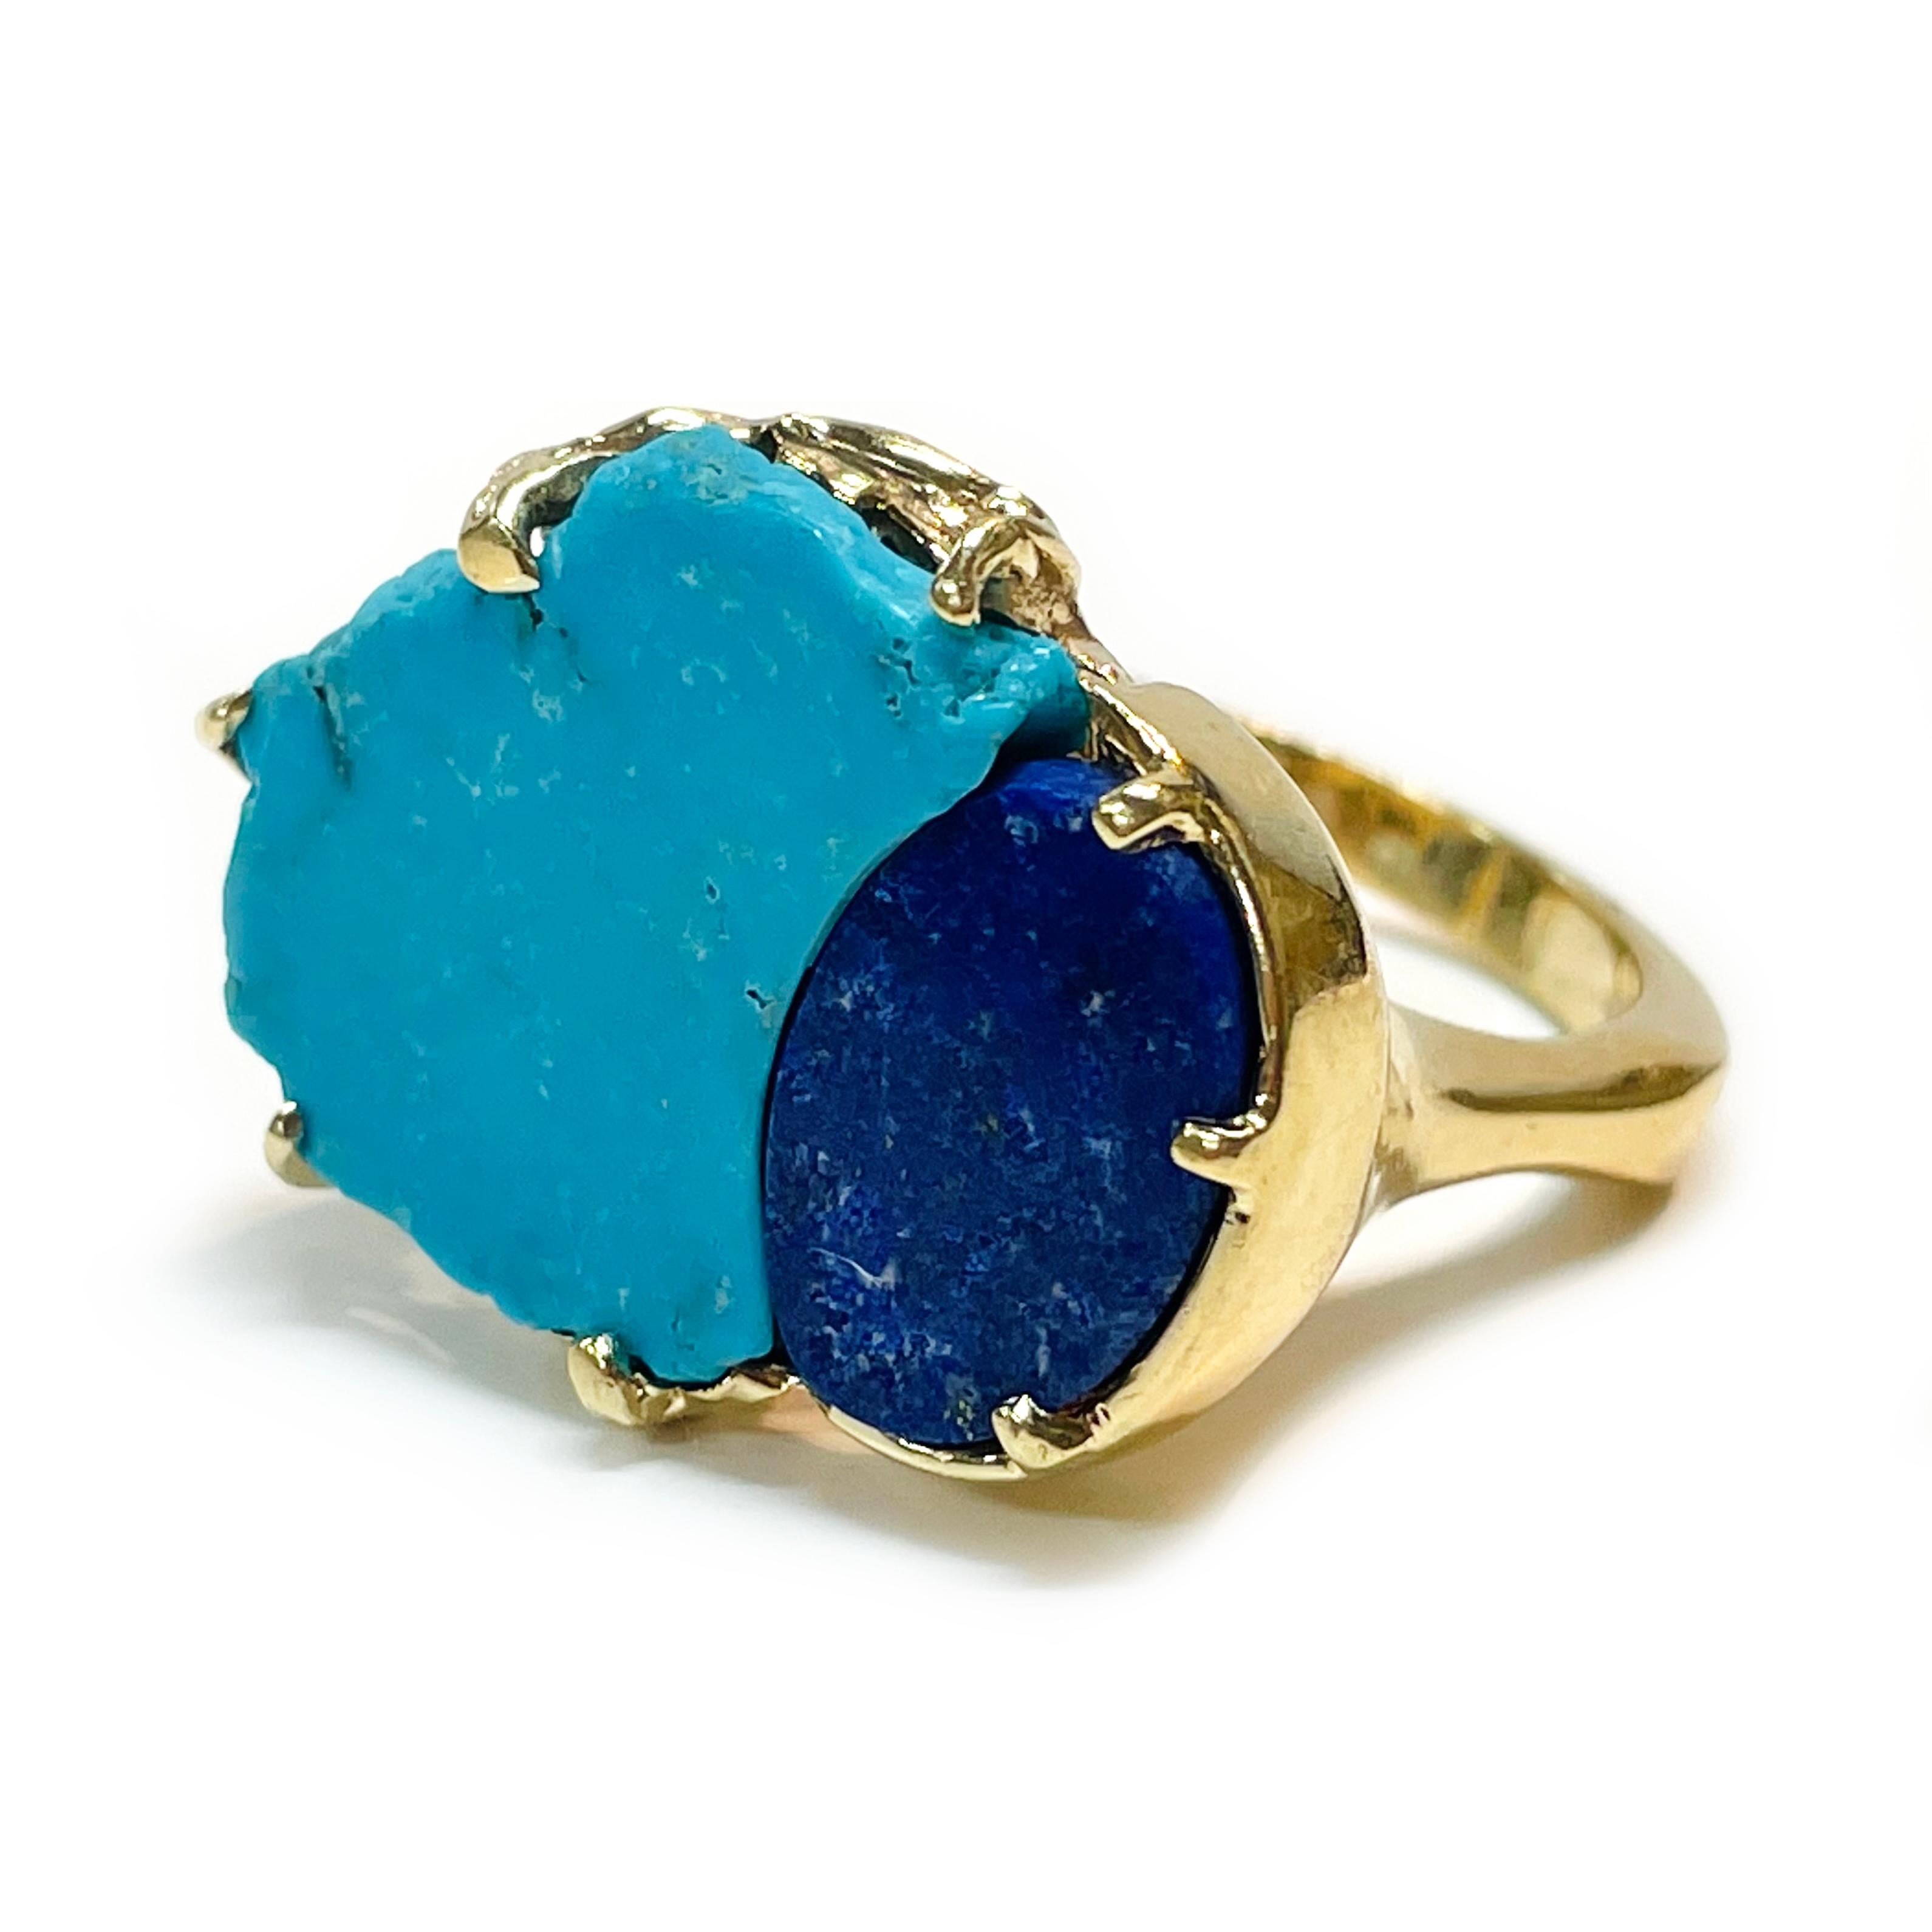 Turquoise Lapis Lazuli 14K Yellow Gold Free-Form Cocktail Ring. The ring features a flat free-form turquoise and a flat free-form Lapis Lazuli, together they measure approximately 23.5 x 18.6mm. The gallery and band is organic with branch-like